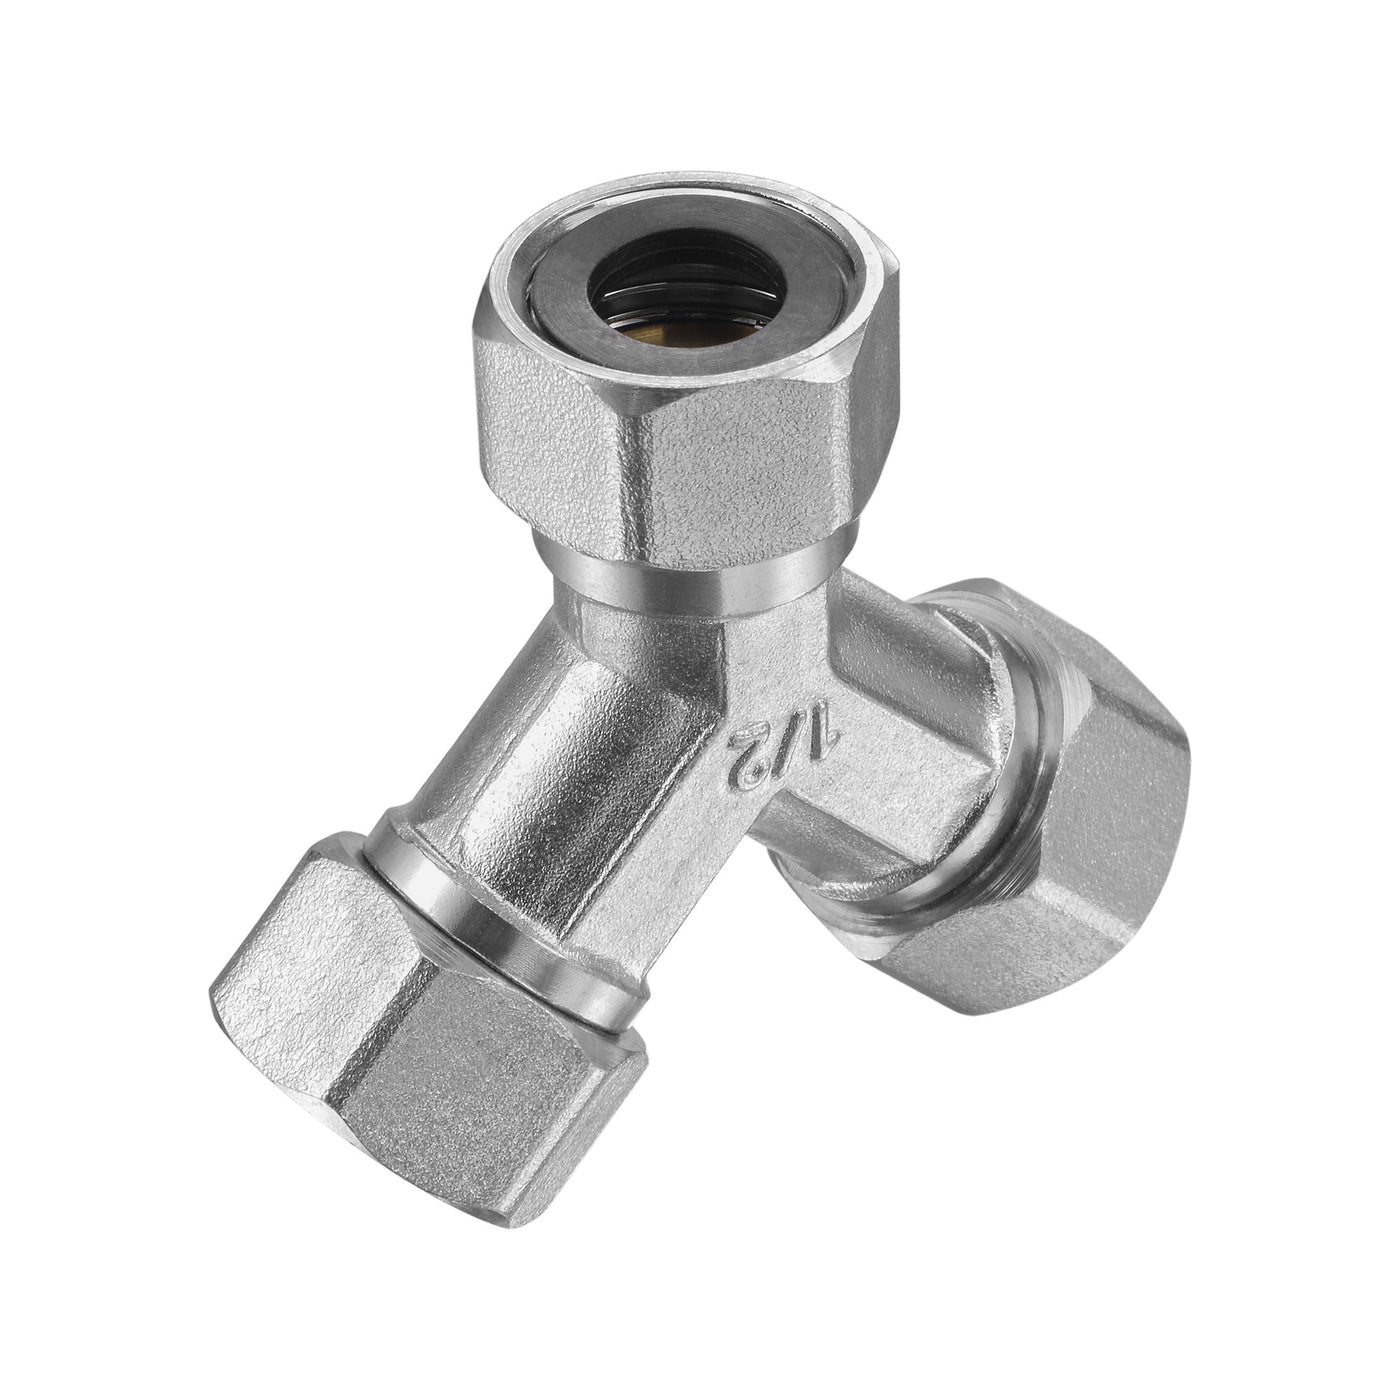 uxcell Uxcell Pipe Fitting G1/2 Female Thread Y Shape 3 Way Wye Hose Connector Adapter, Nickel-Plated Copper